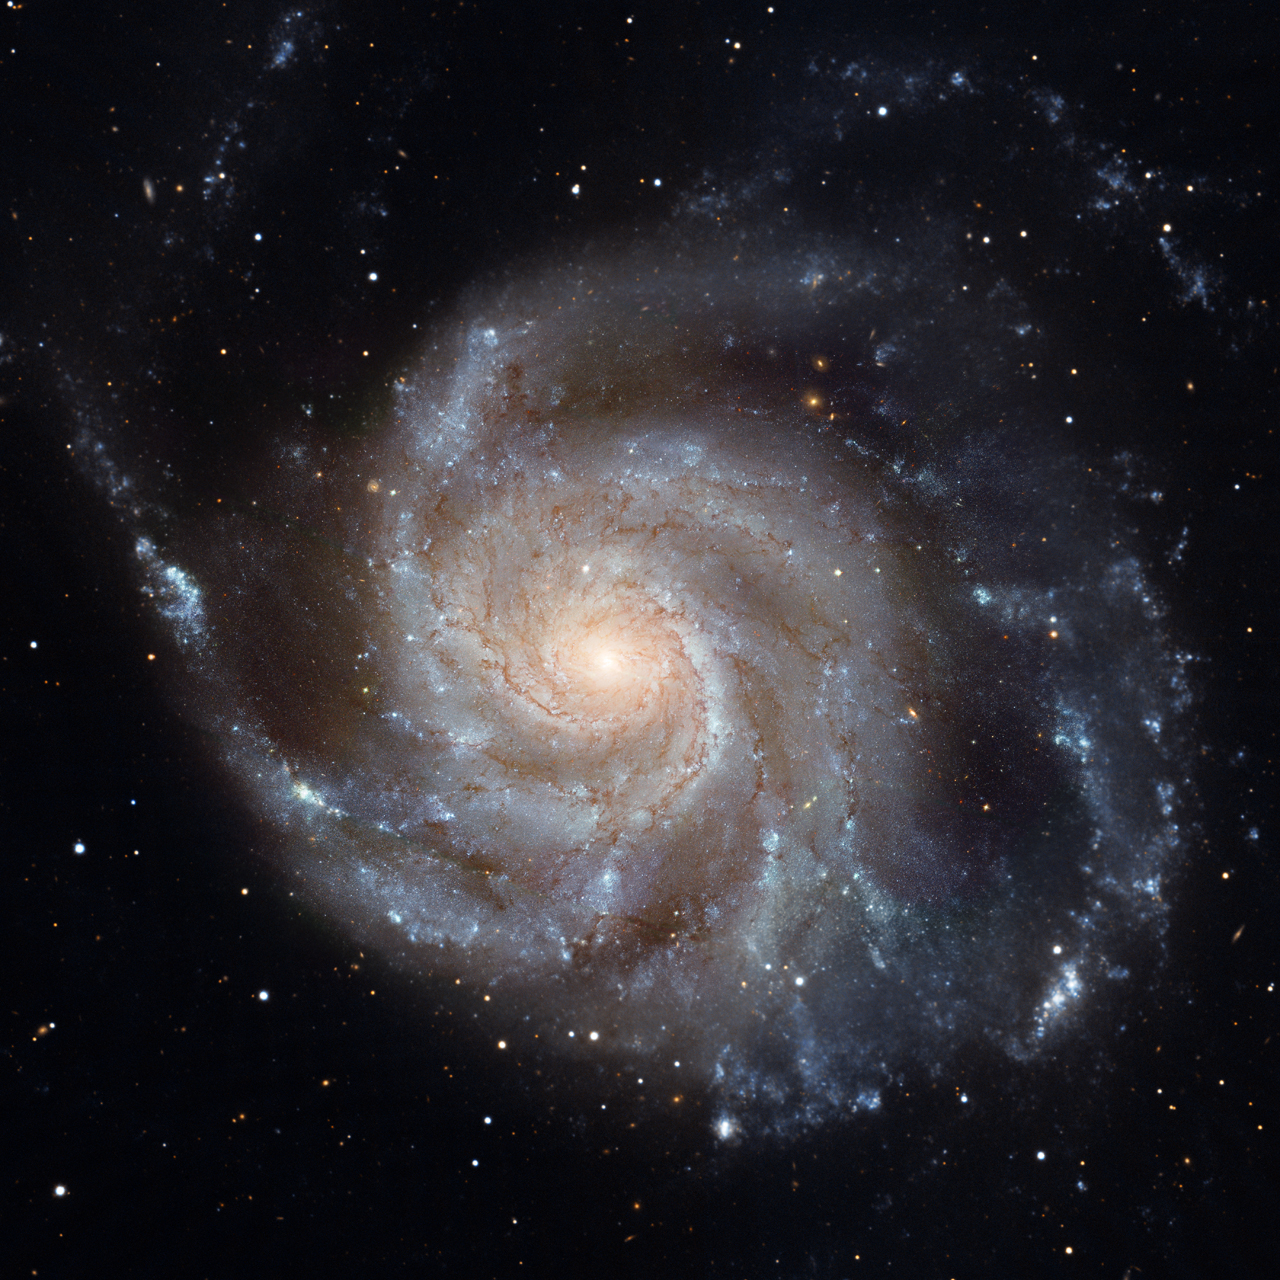 An image of Messier 101, the Pinwheel Galaxy, made with the Hubble Space Telescope. The bright blue clumps in the spiral arms are sites of recent star formation.